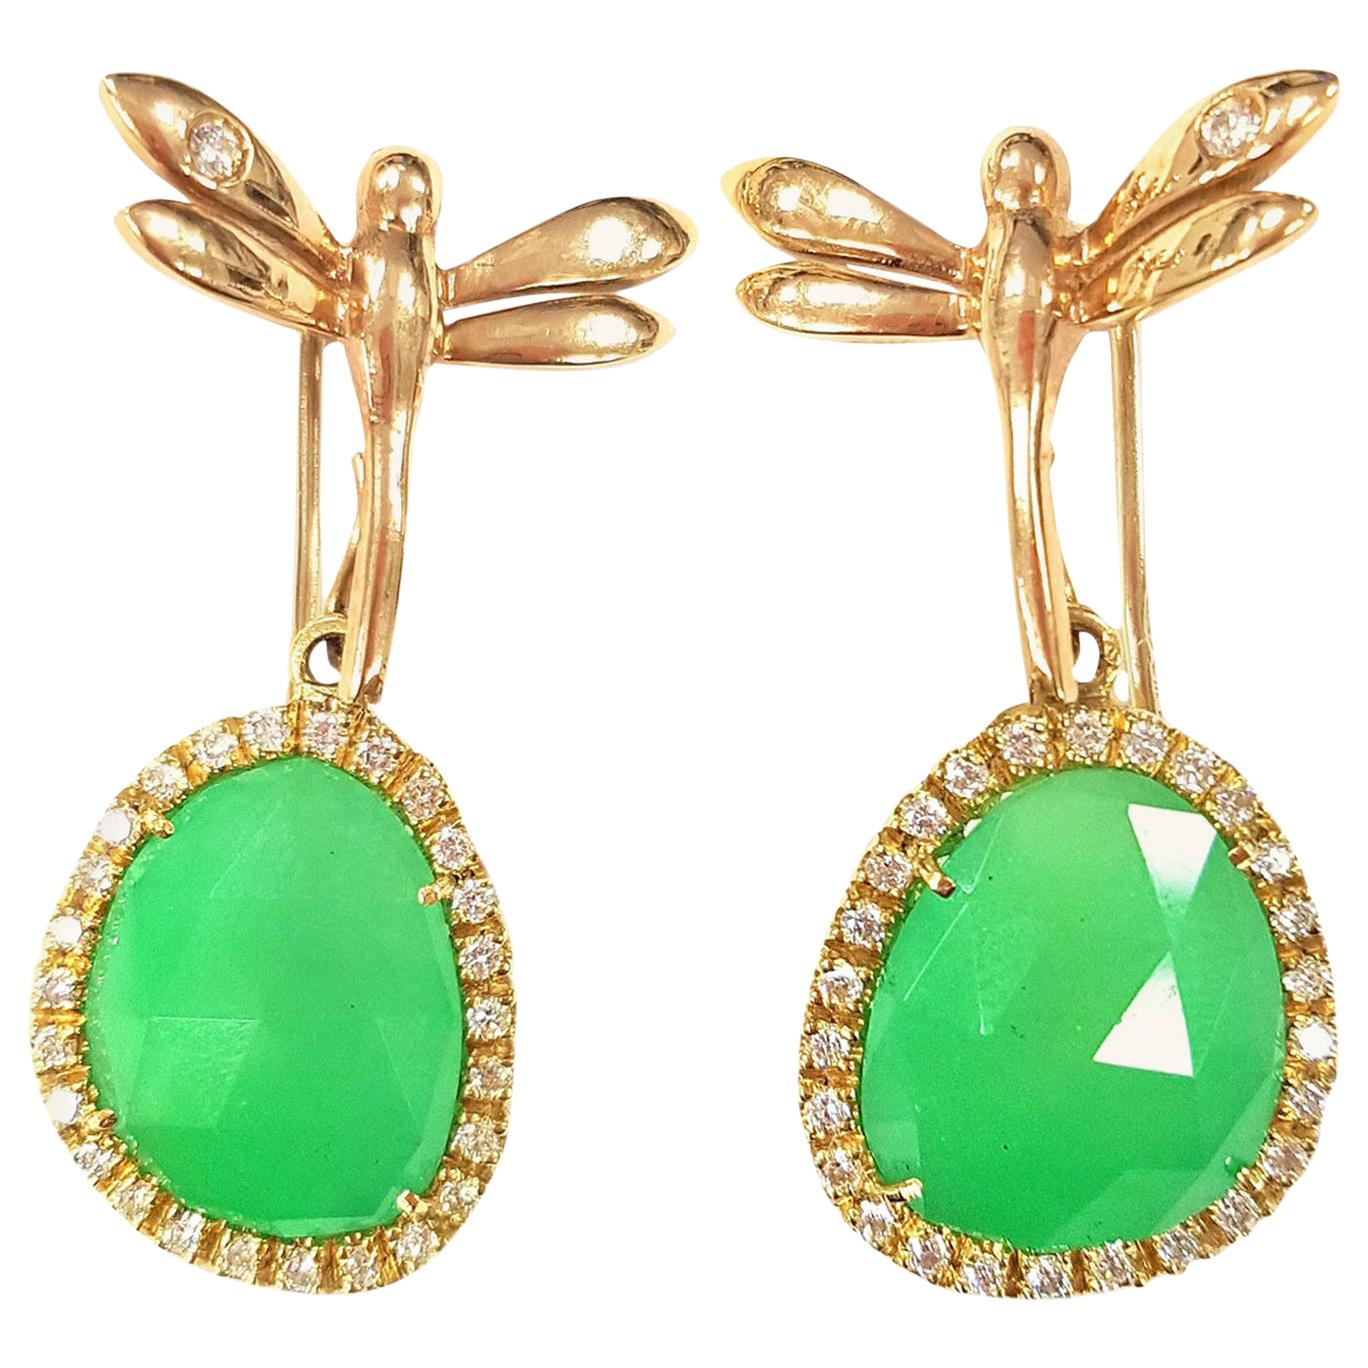 Contemporary 18 Karat Gold Convertible Bright Jade Earrings with Dragonfly For Sale